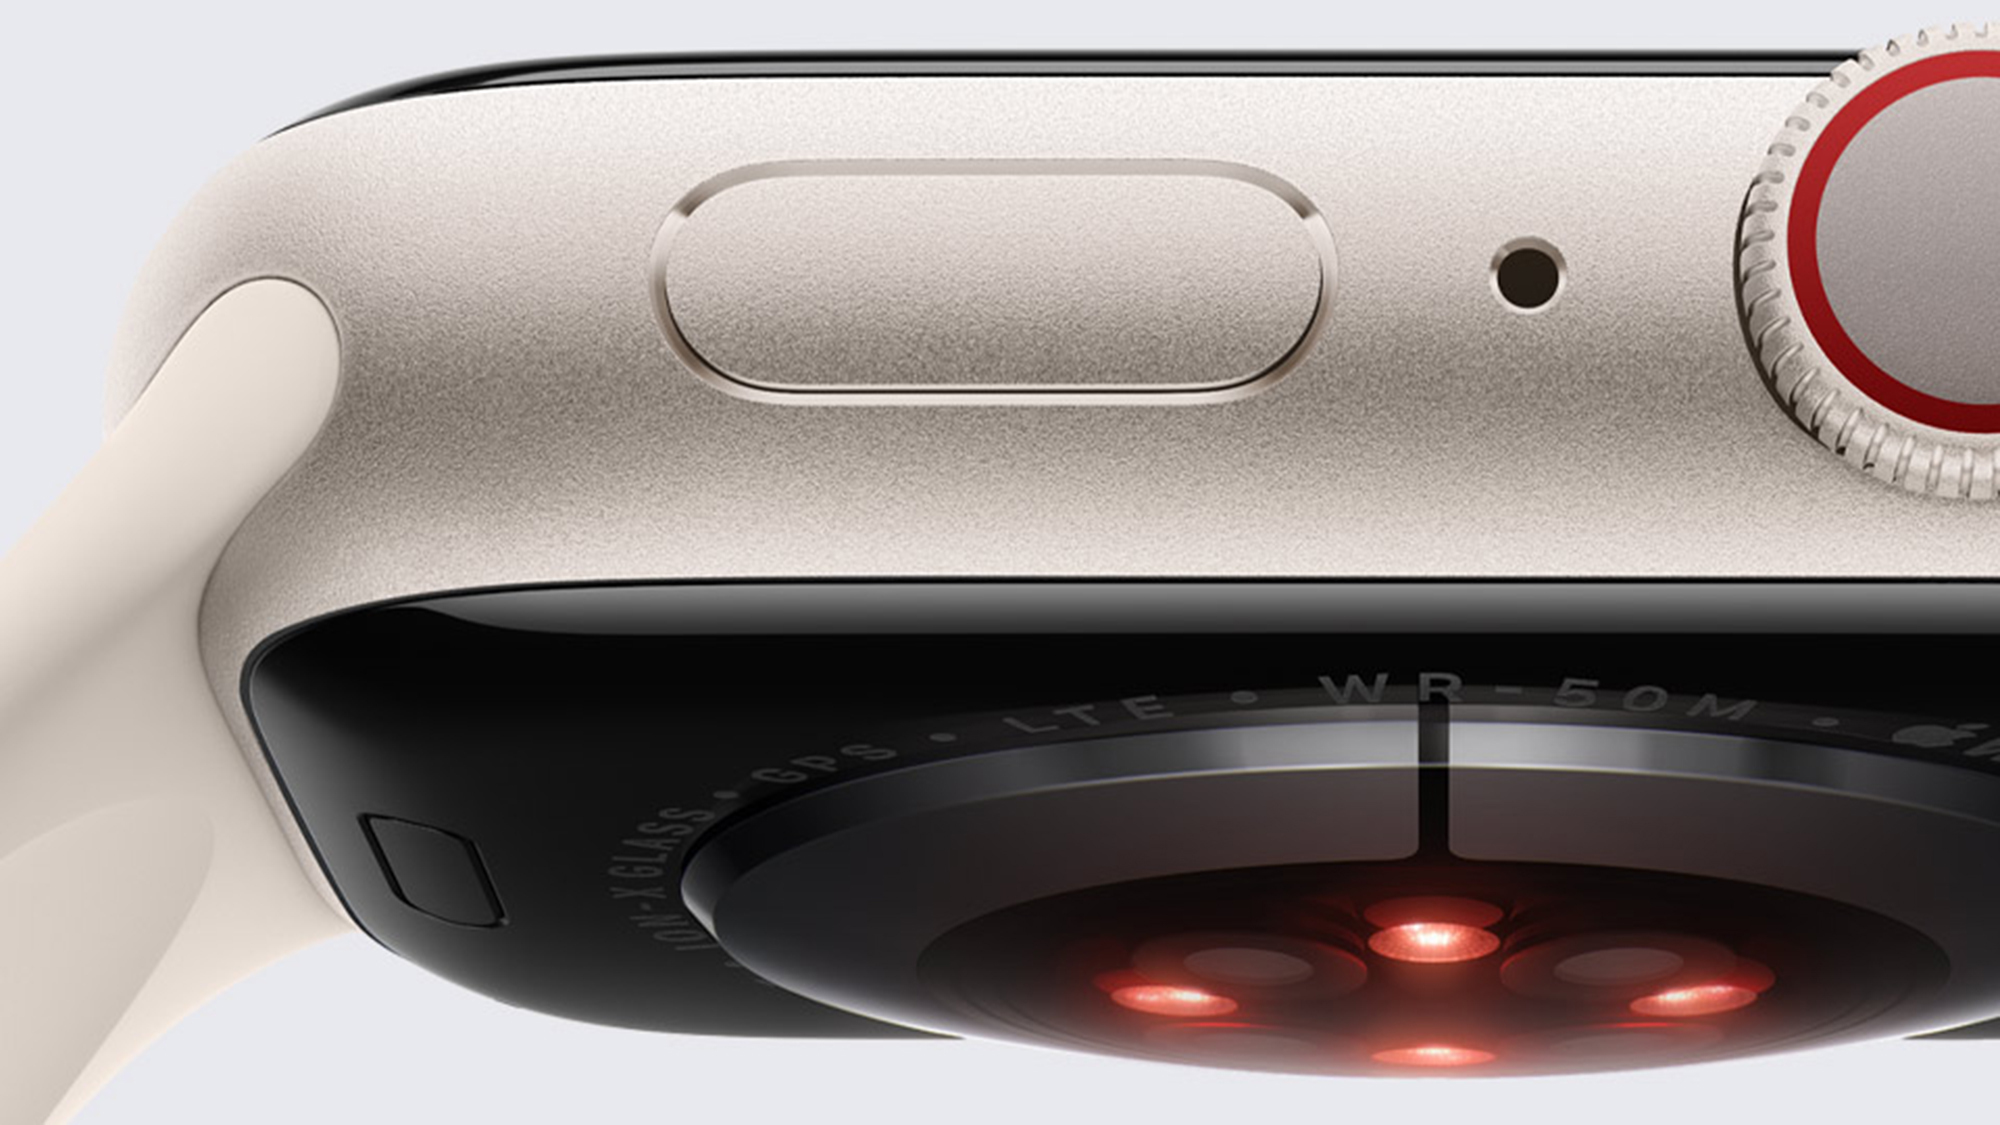 You may not be able to buy the latest Apple Watches after December 24th thumbnail